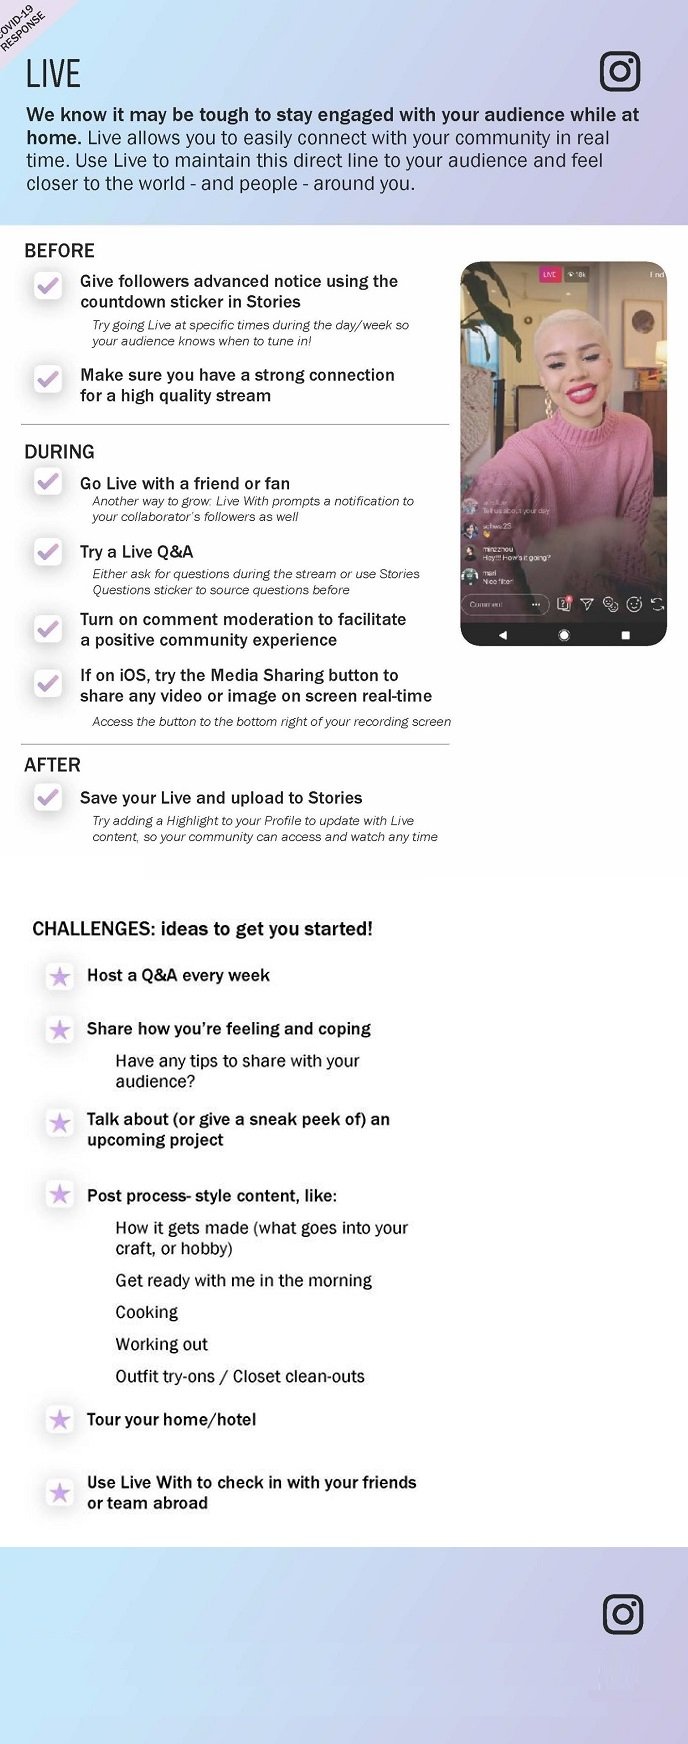 , Instagram Provides Tips on Maintaining Connection via Instagram Live During COVID-19 Lockdowns [Infographic], TornCRM